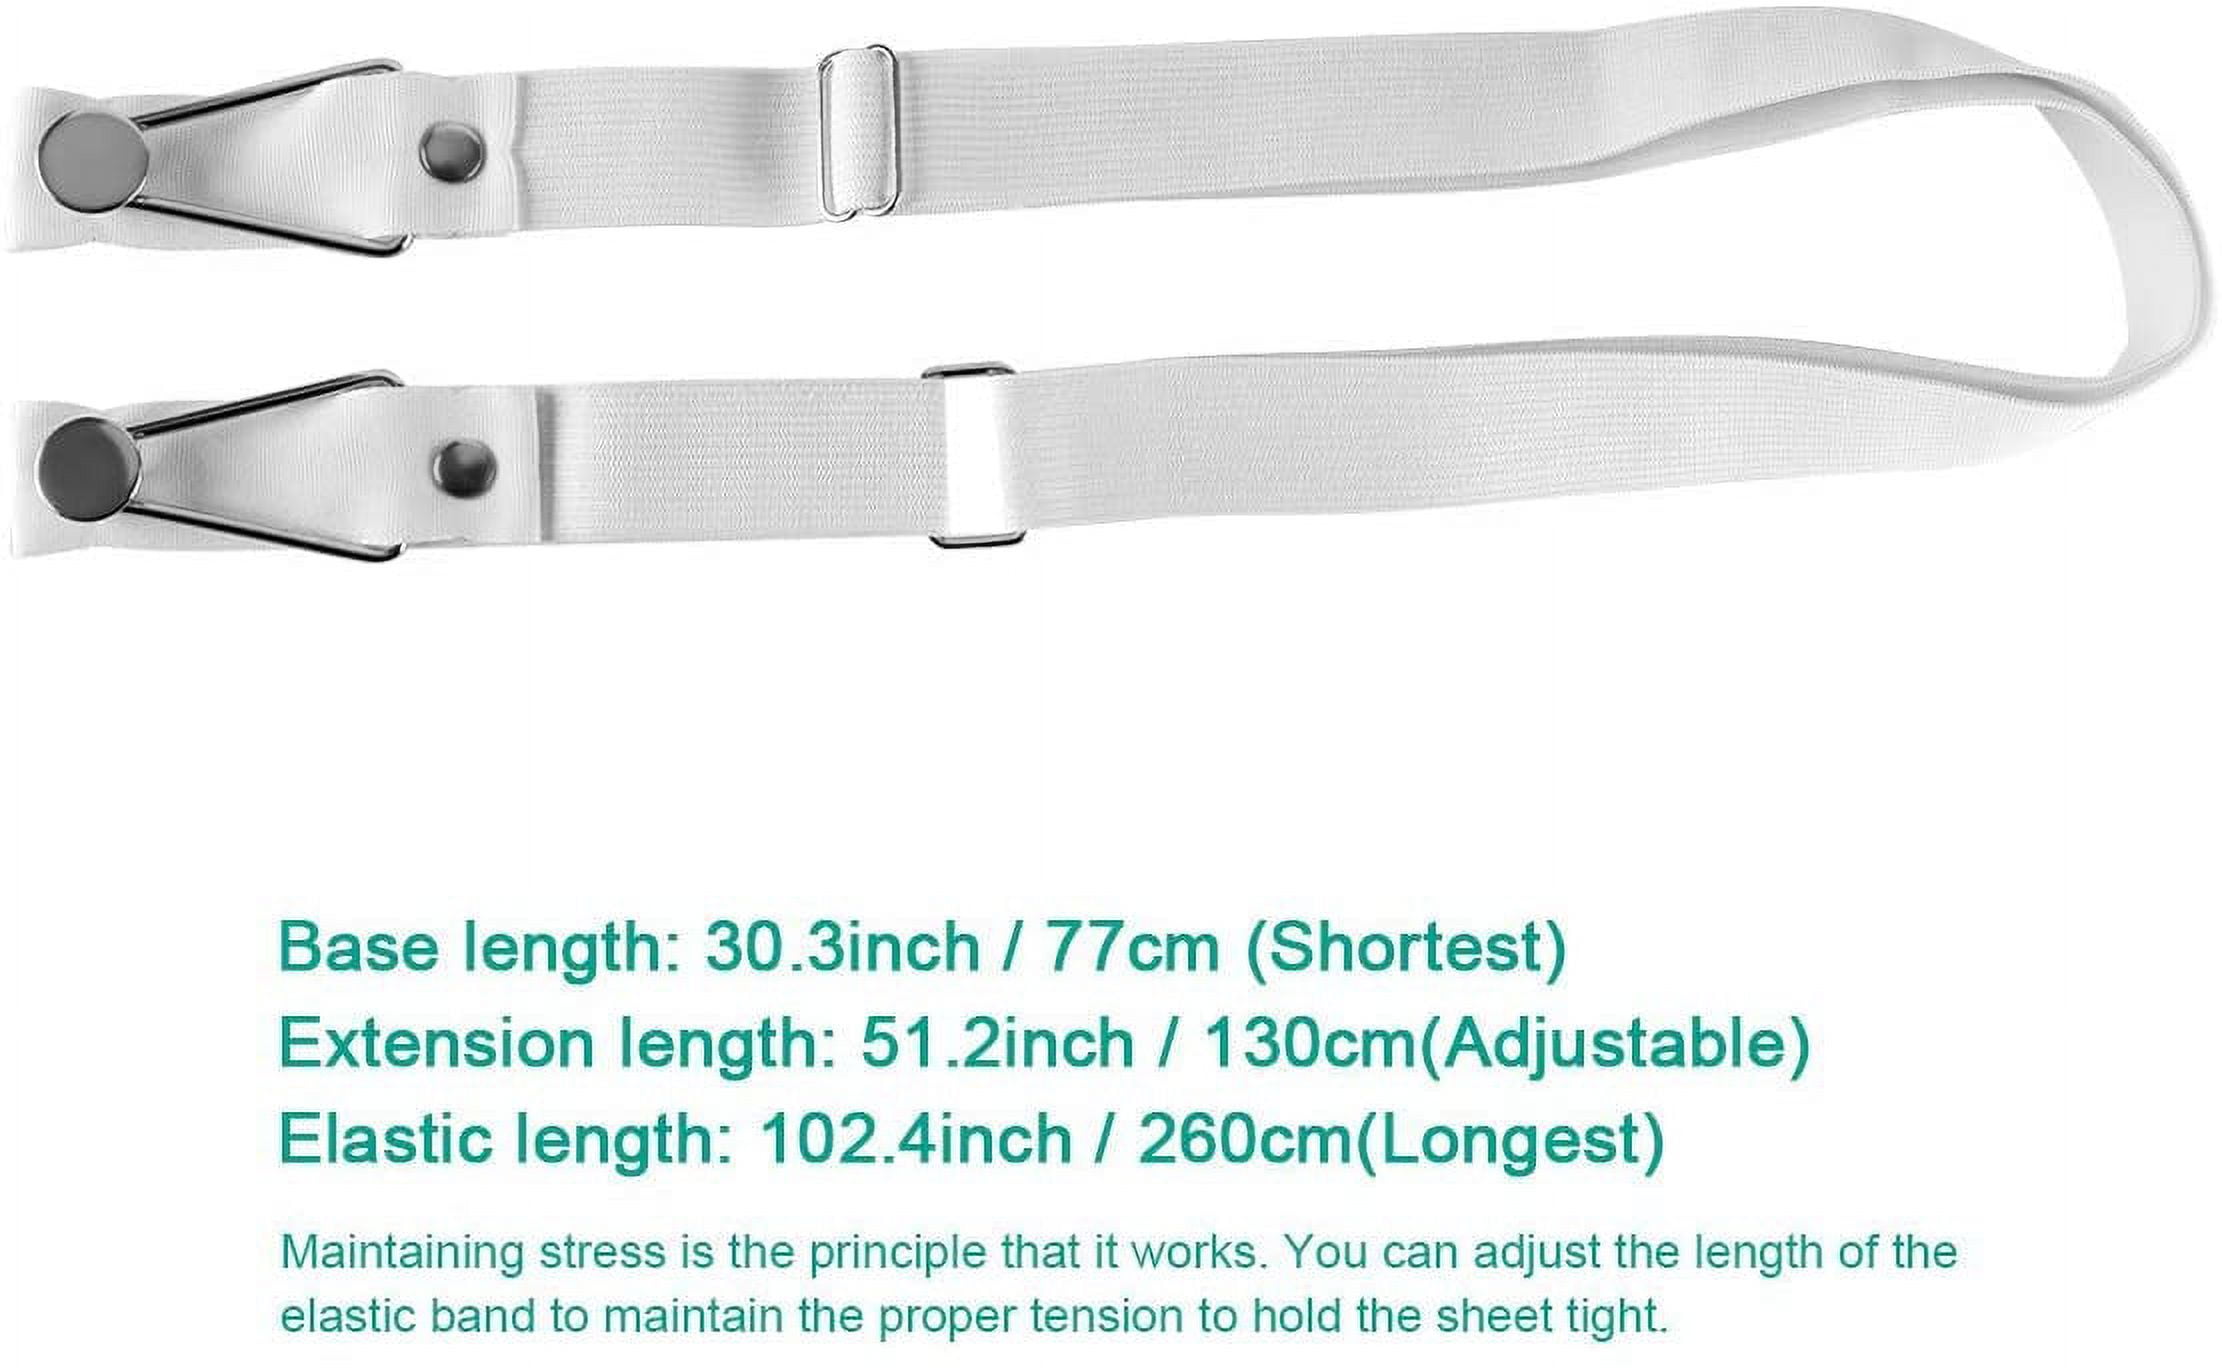 Gpct Fitted Bed Sheet Suspender Strap. Bed Sheet Fasteners Clippers, 4 Pcs Adjustable Crisscross Elastic Gripper Holder Clip for Mattress Covers, Sofa